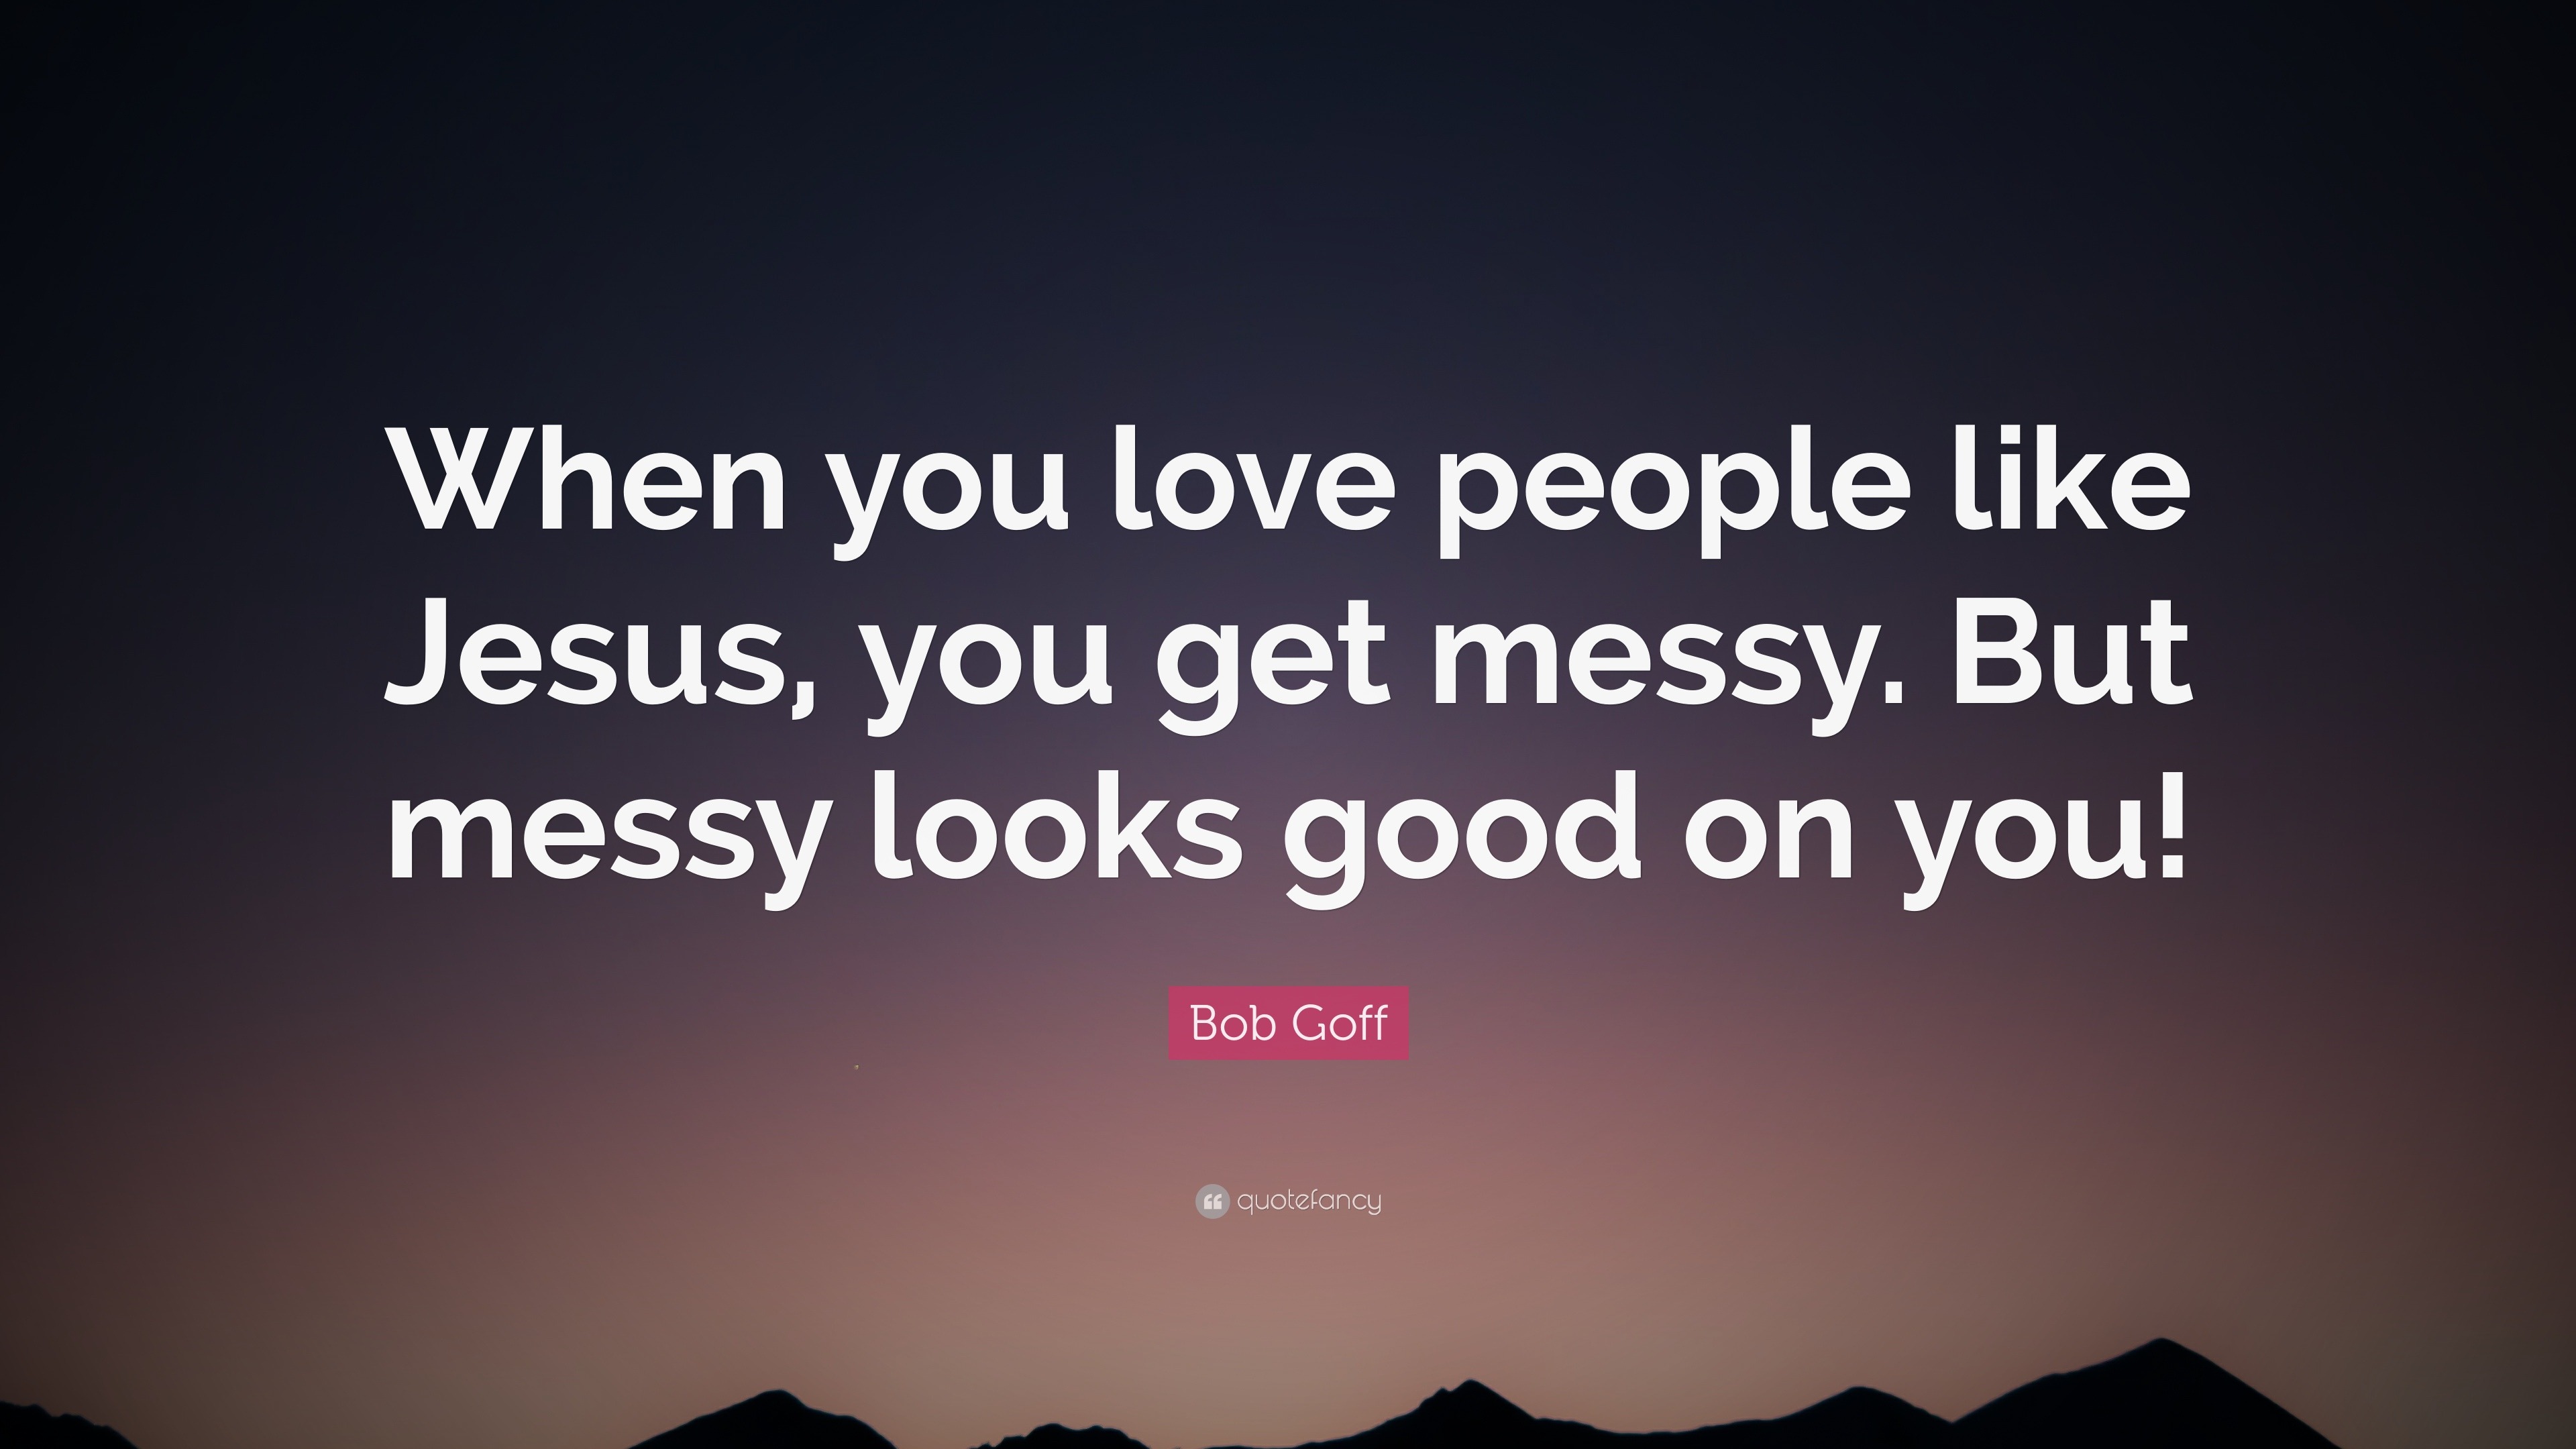 Bob Goff Quote “When you love people like Jesus you messy